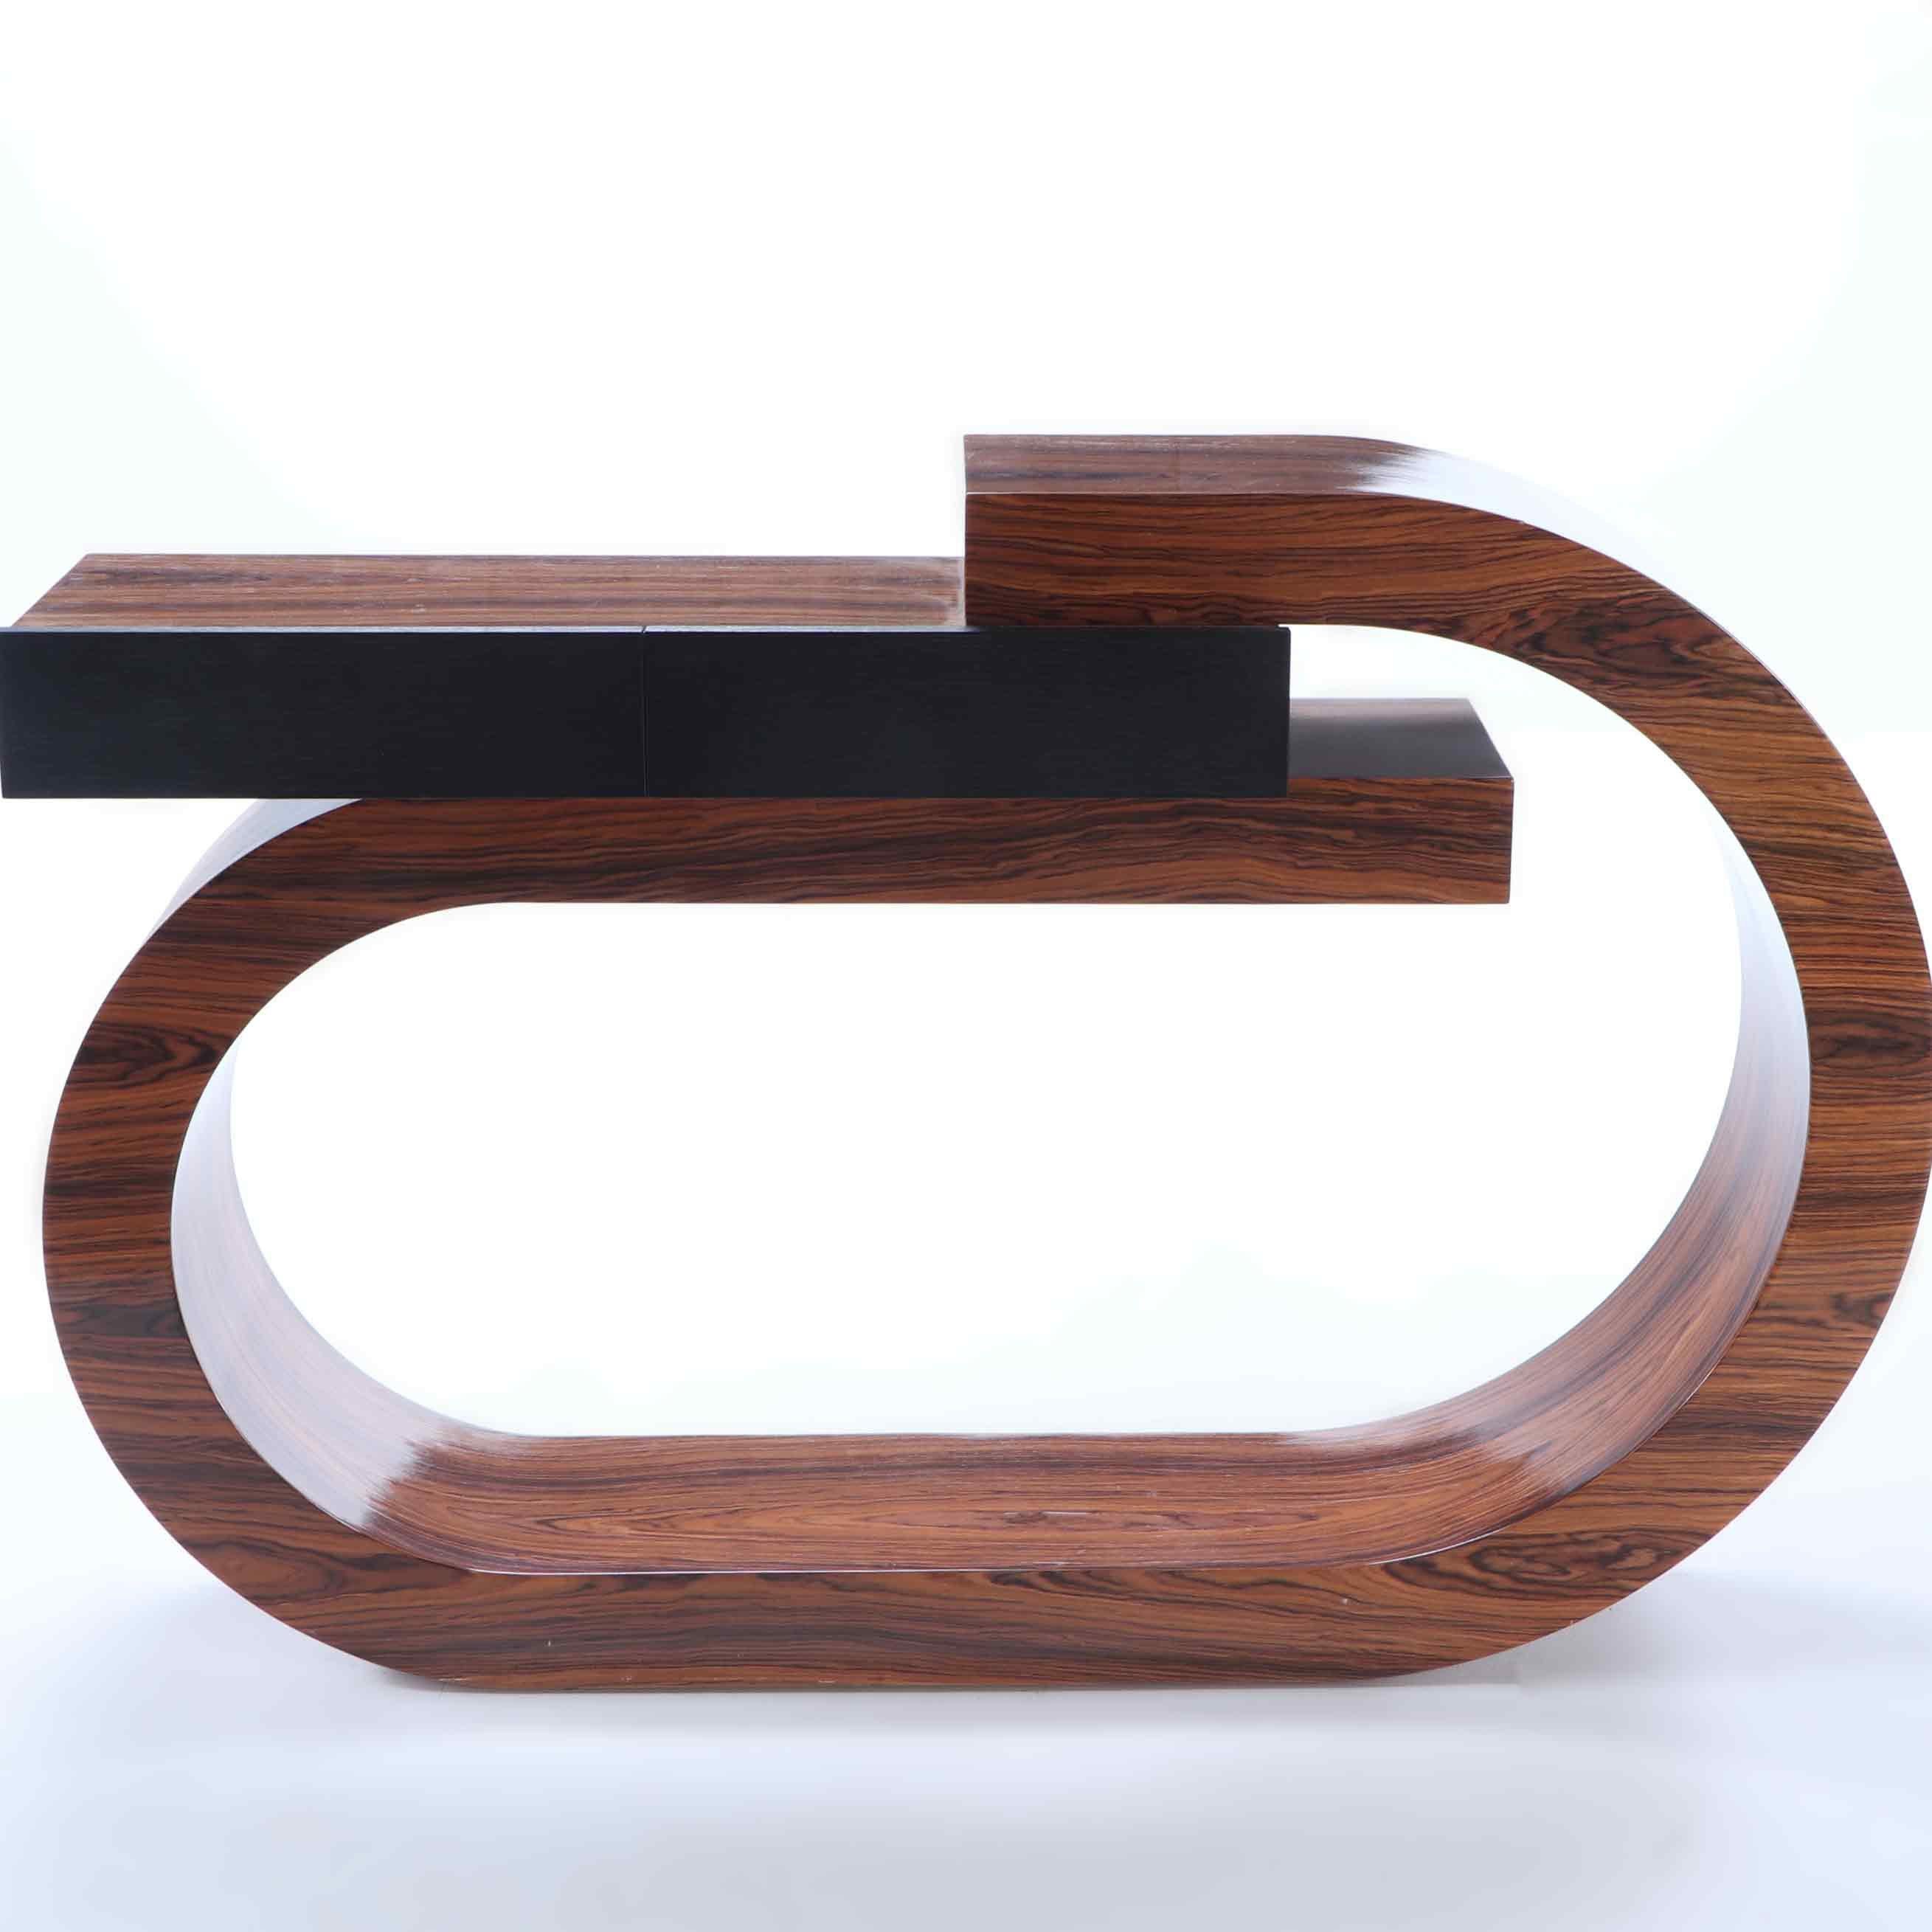 A stunning custom made Art Deco style rosewood console table having an arching design with two ebonized drawers.